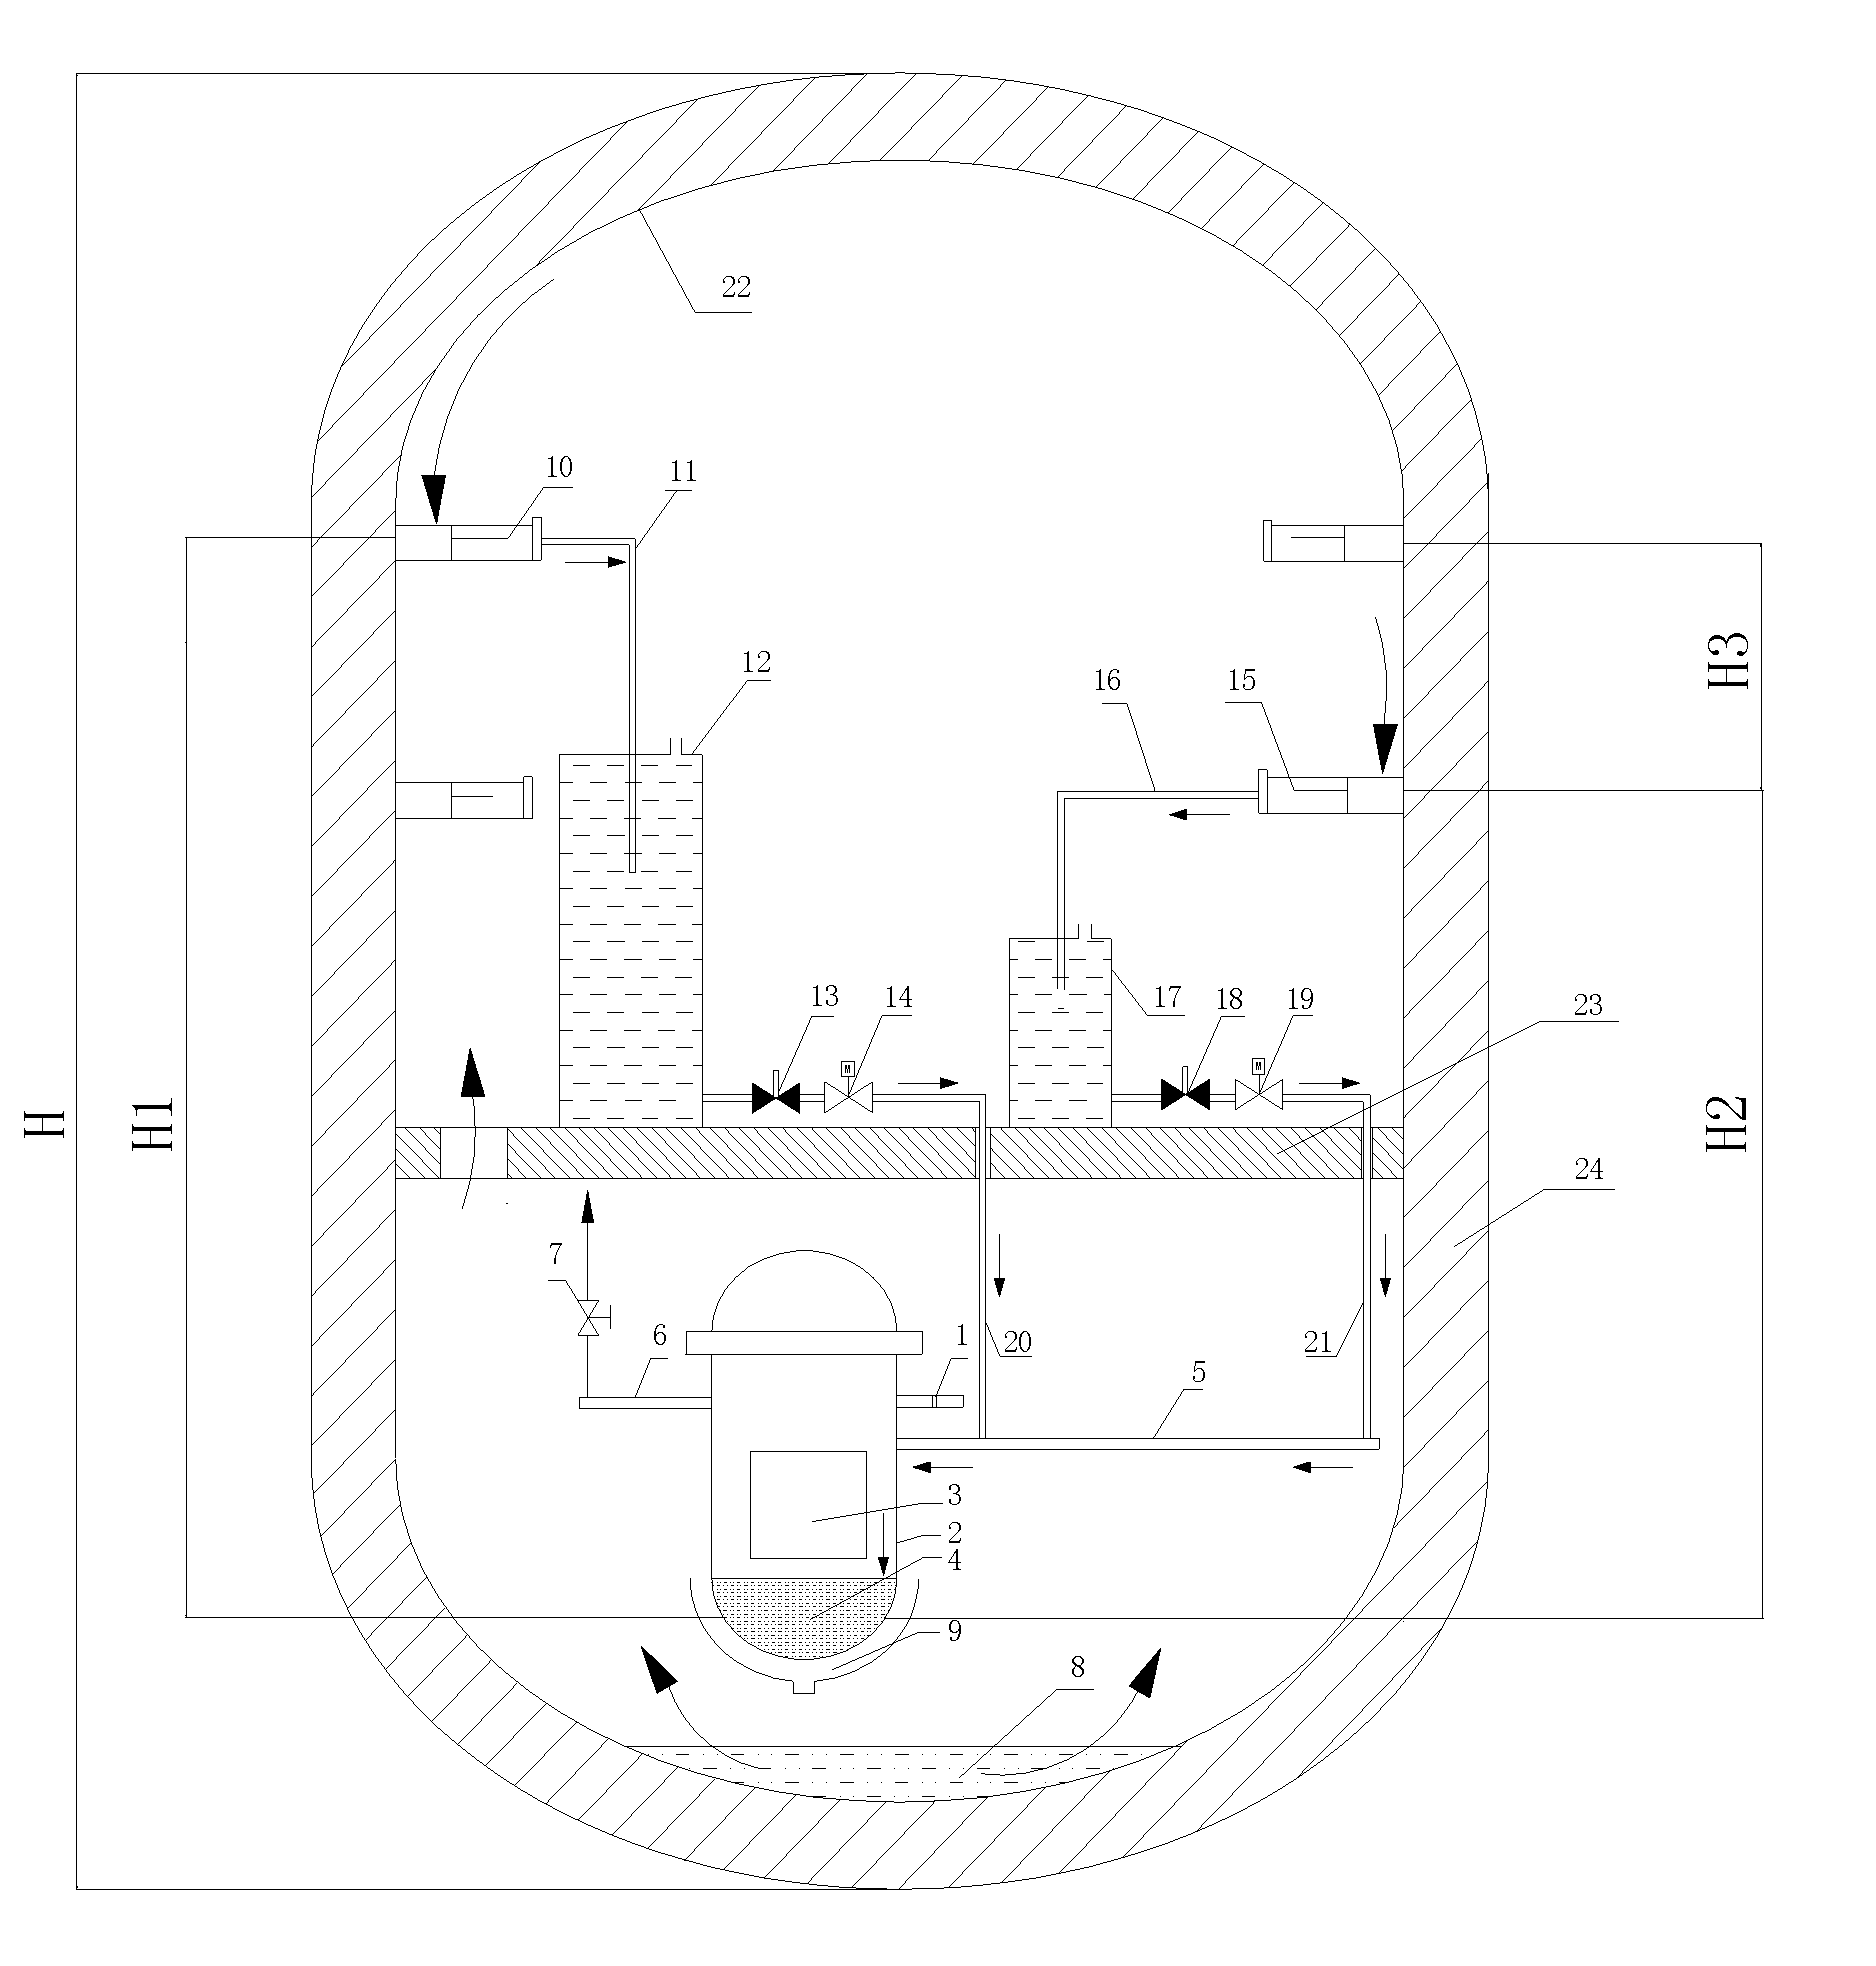 Passive containment shell condensed water injection system